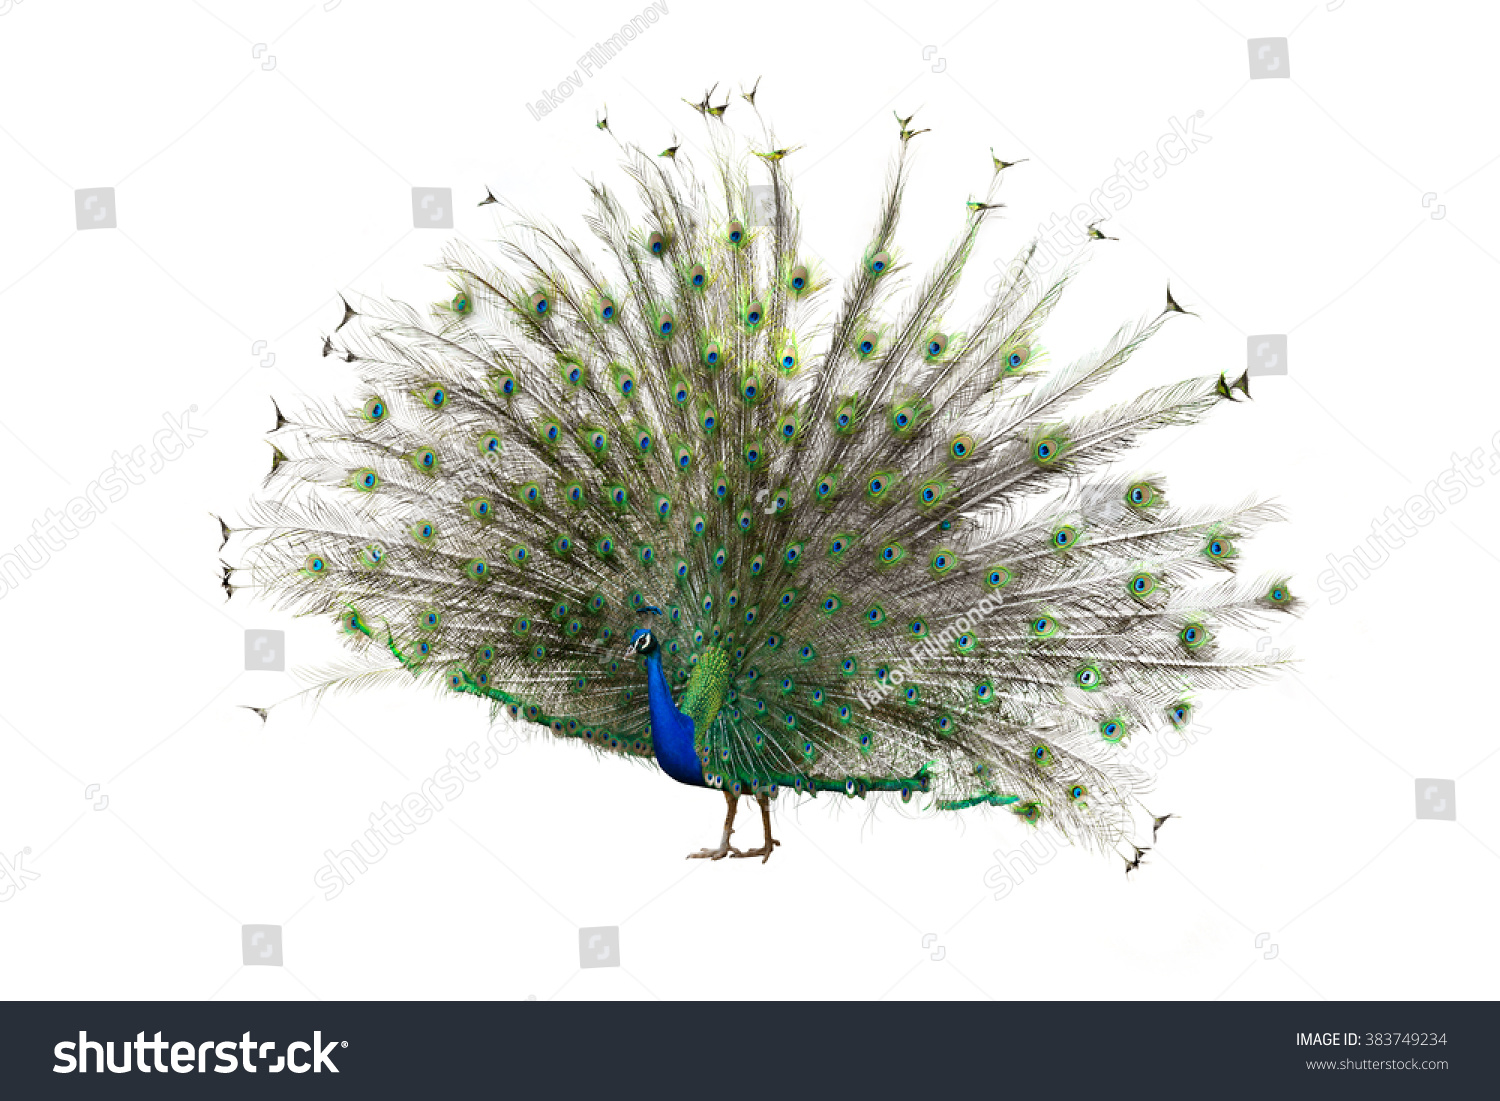 Female Indian Peafowl (peahen). Isolated over white  #383749234